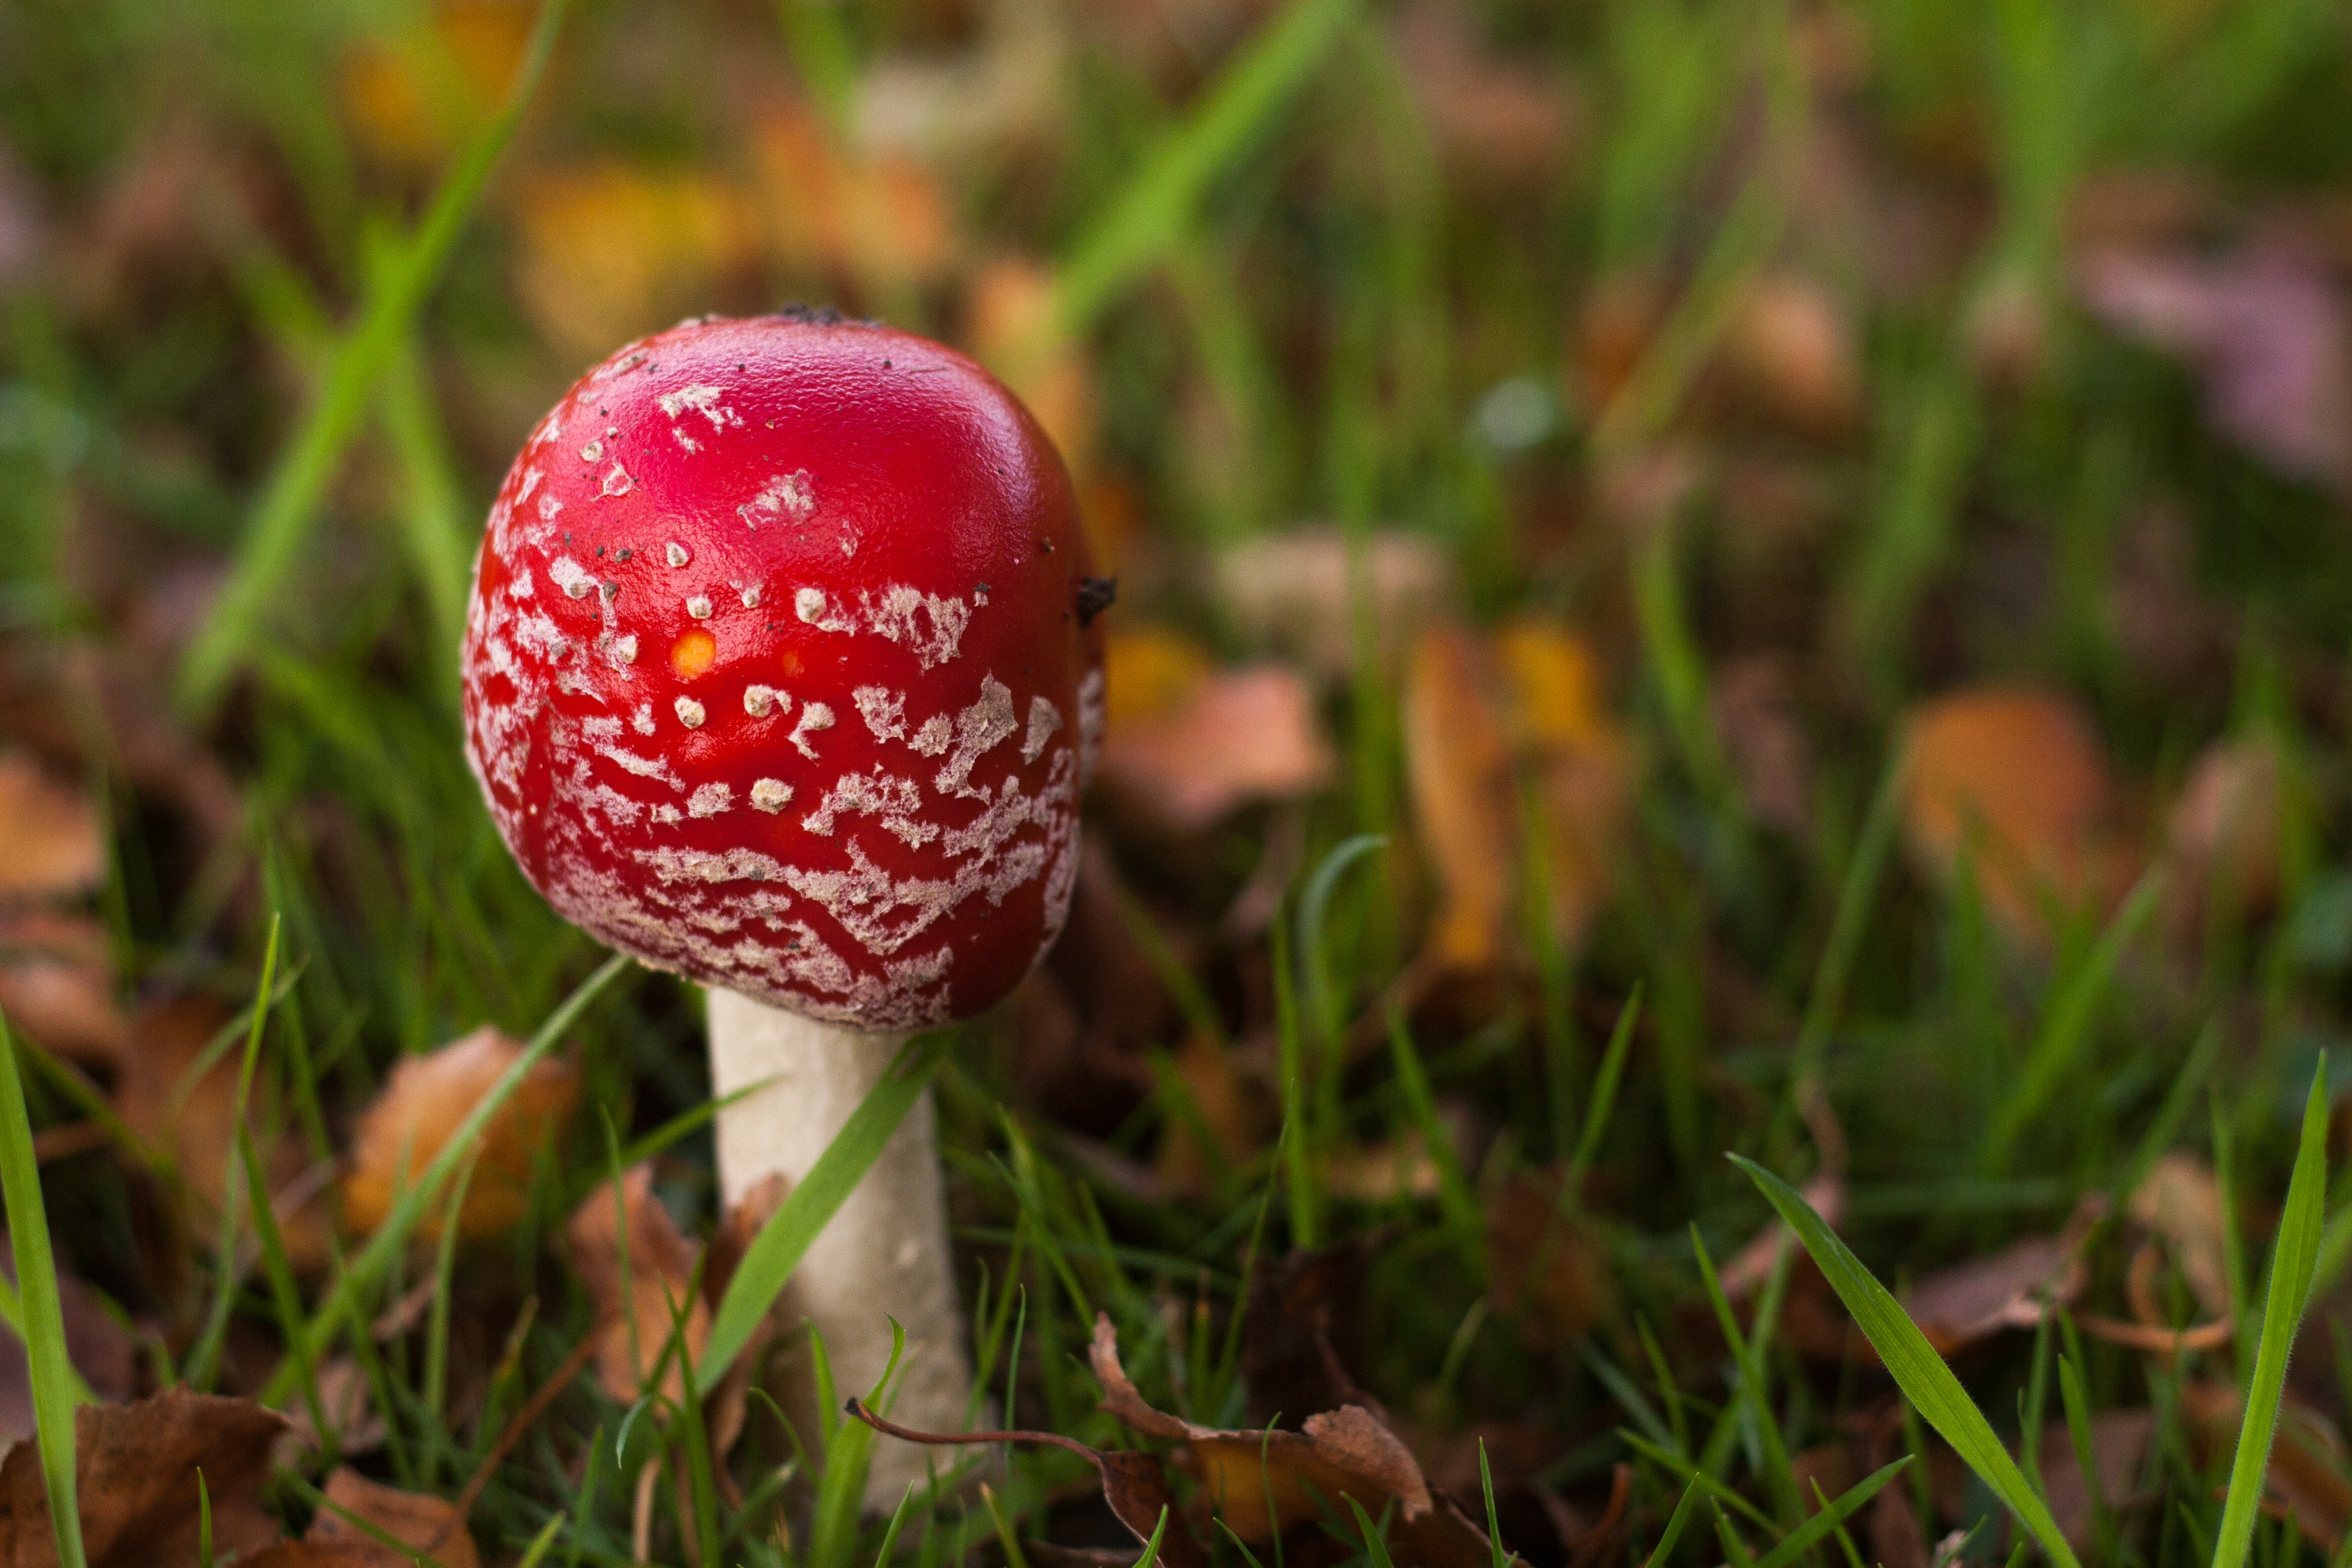 toadstool at the beginning of winter